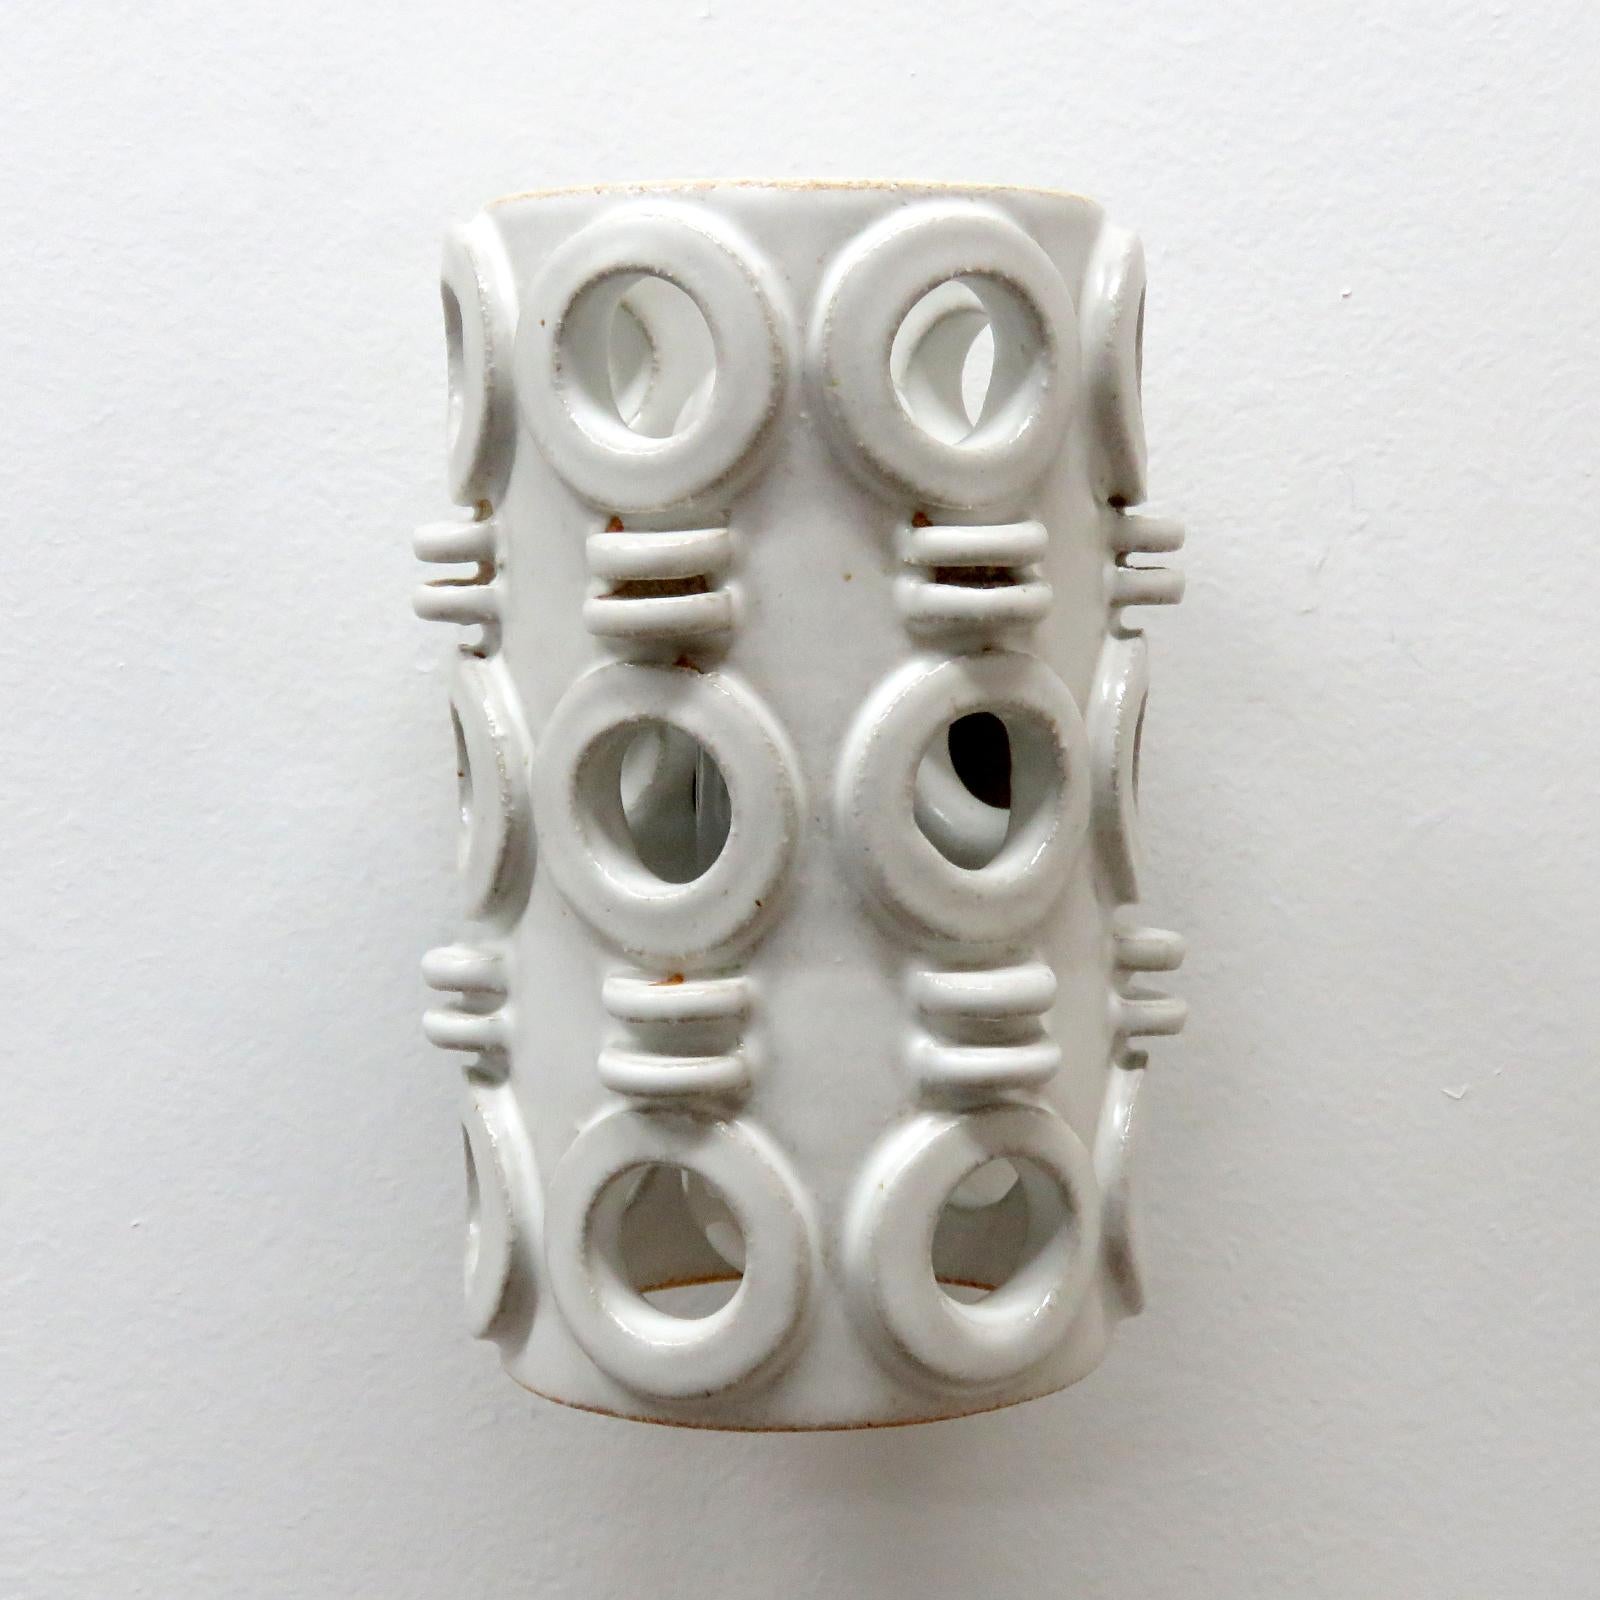 wonderfully sculptural ceramic wall light No.49, designed and handcrafted by Los Angeles based ceramicist Heather Levine. High fired stoneware with grey/white glaze body with decorative perforations to expose light in patterns on nearby surfaces.